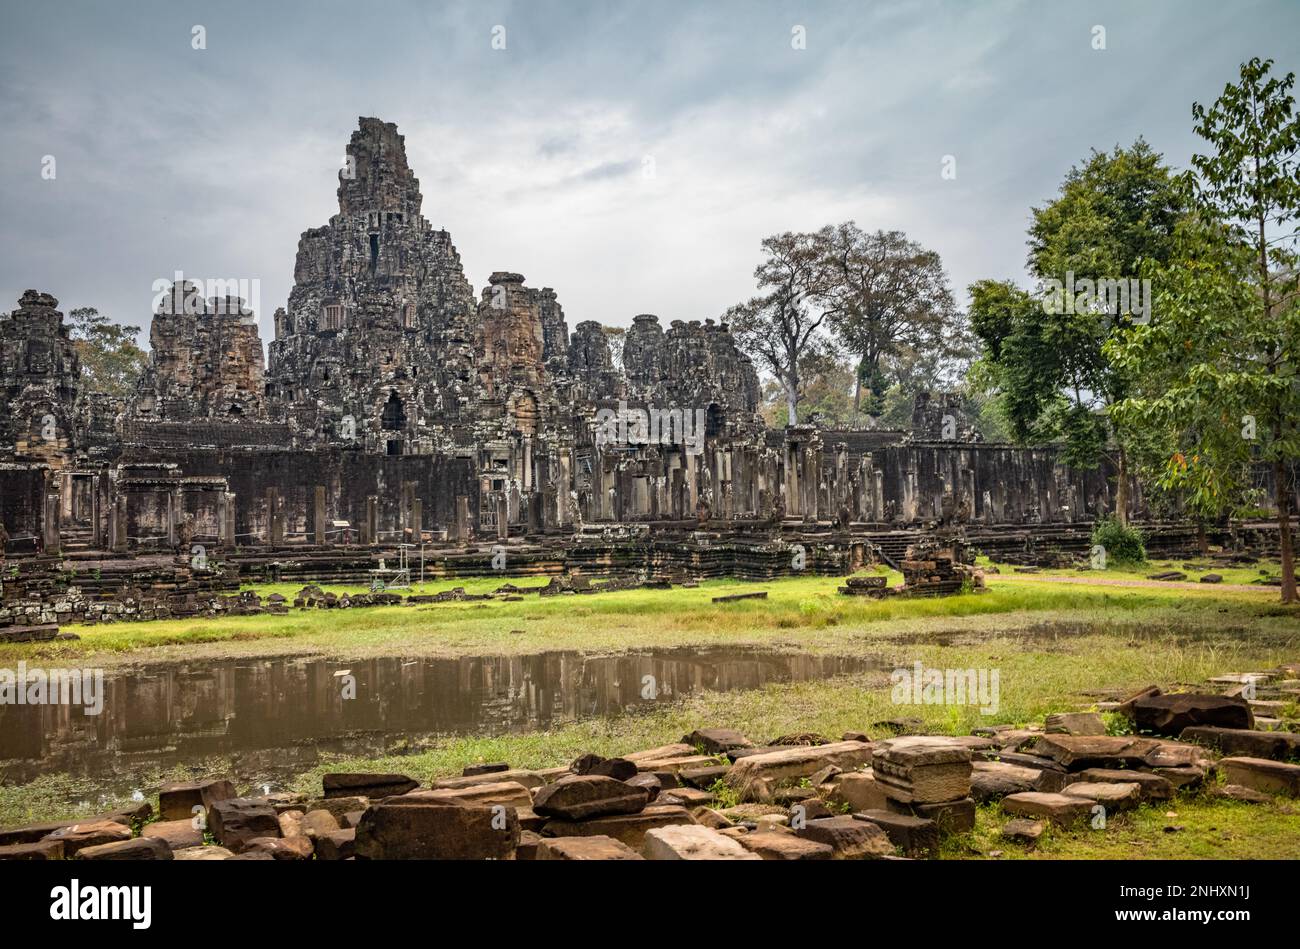 A view of the side of the famed Bayon Temple within Angkor Thom near Angkor Wat in Cambodia. Stock Photo